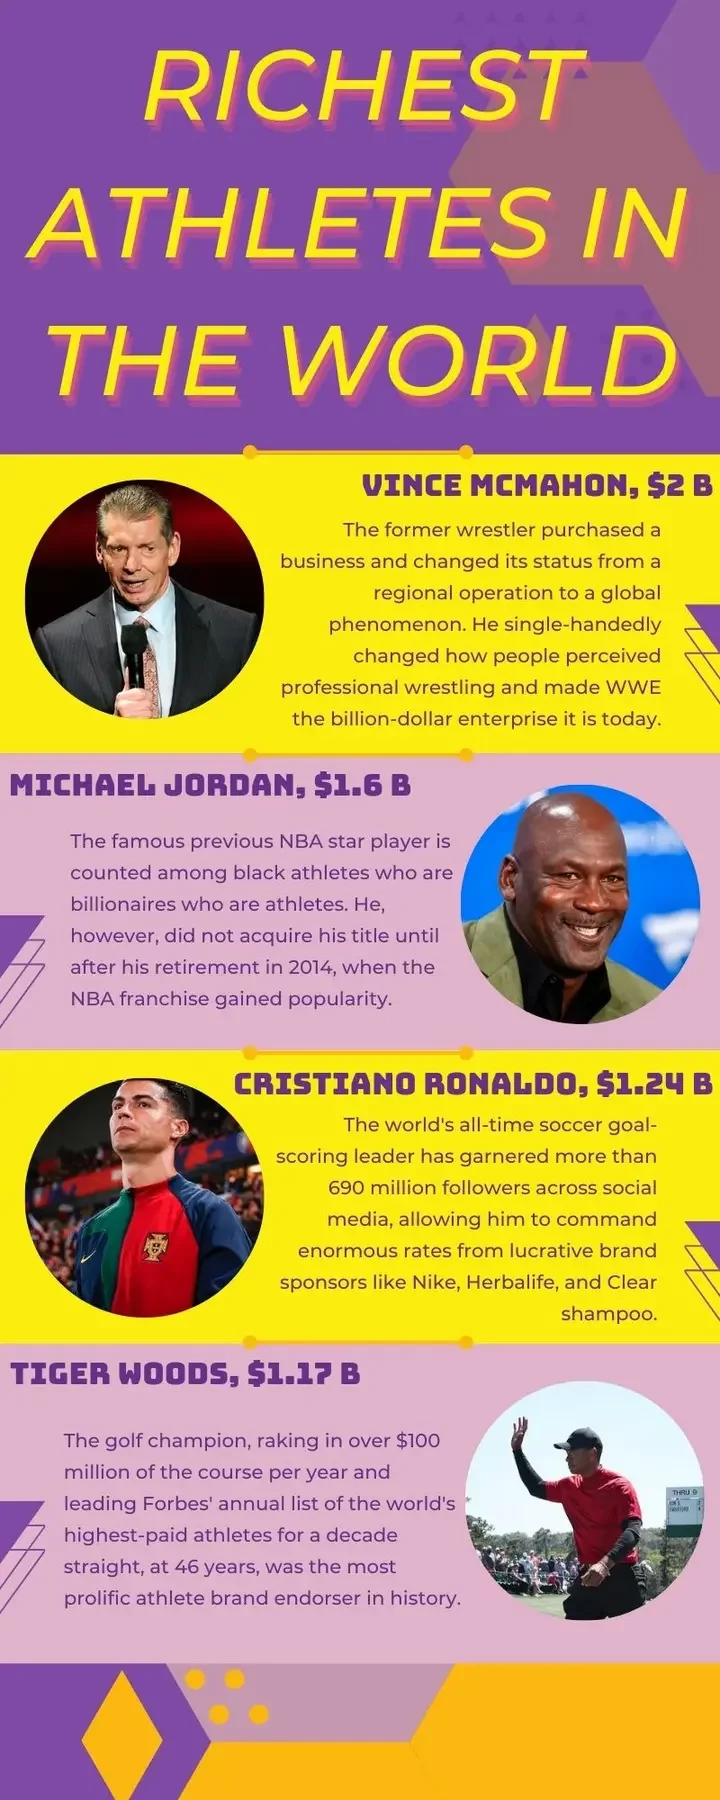 Rich List: These are the 8 richest athletes in the world